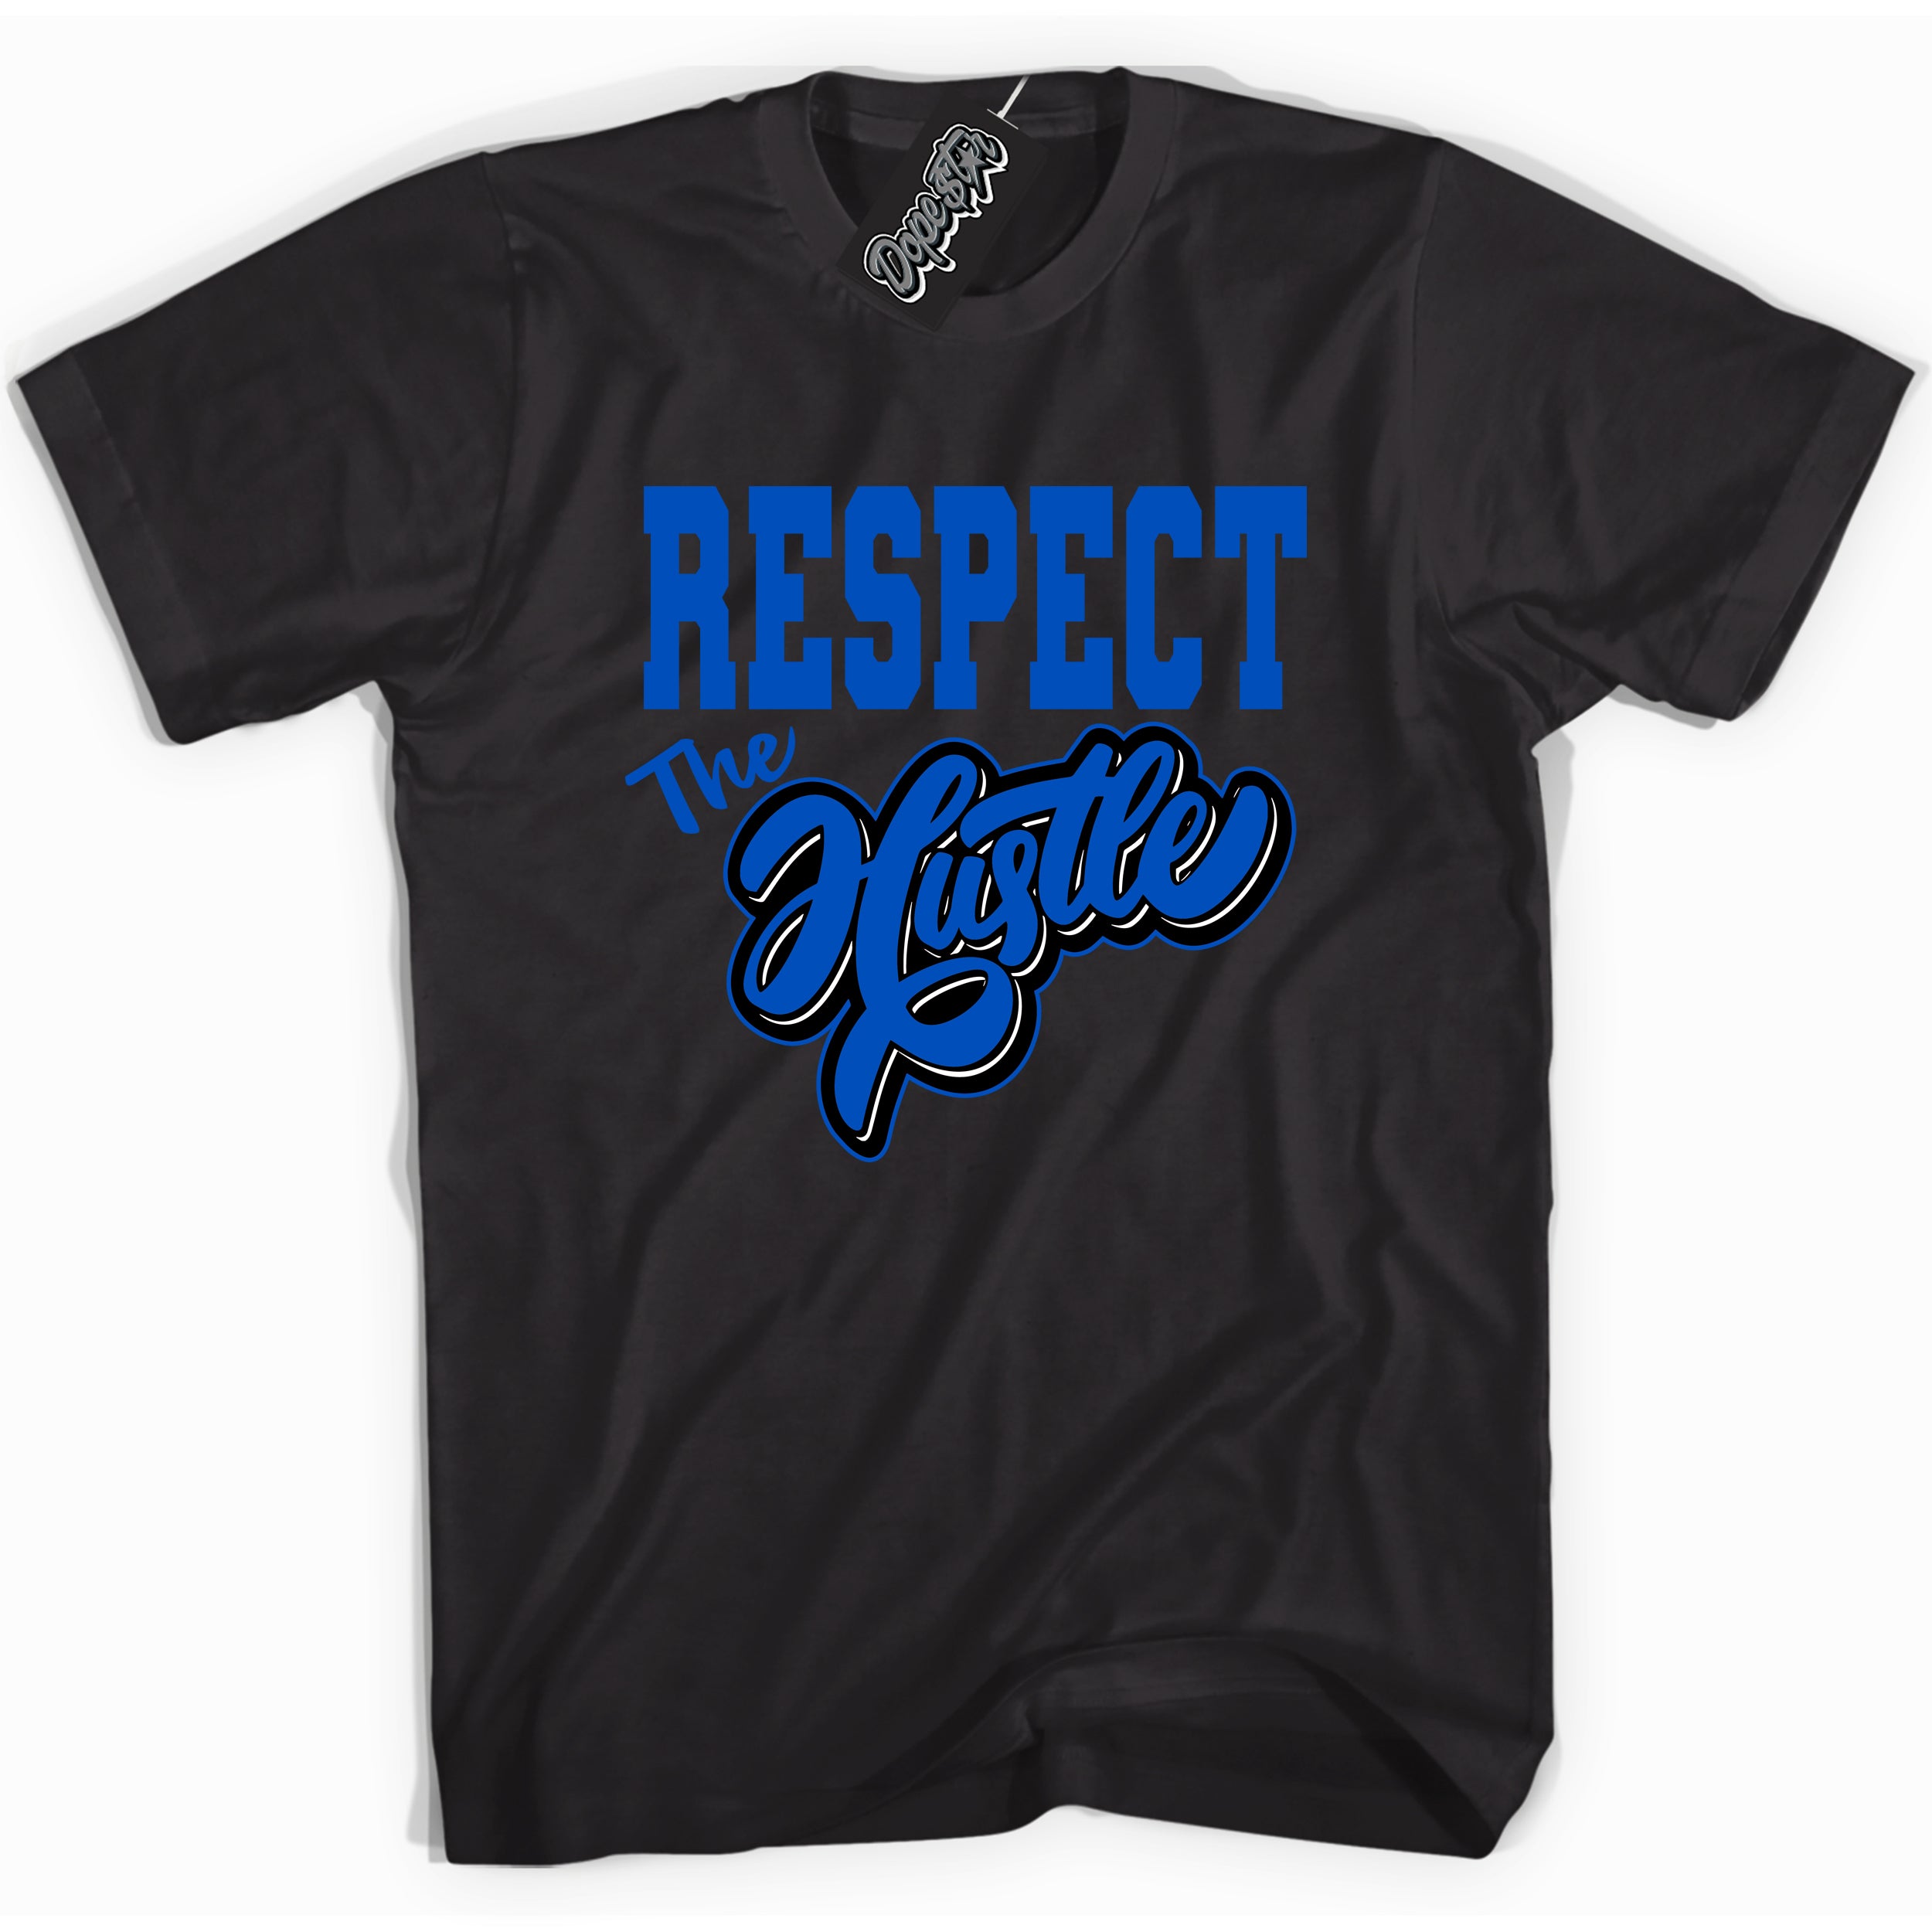 Cool Black graphic tee with "Respect The Hustle" design, that perfectly matches Royal Reimagined 1s sneakers 